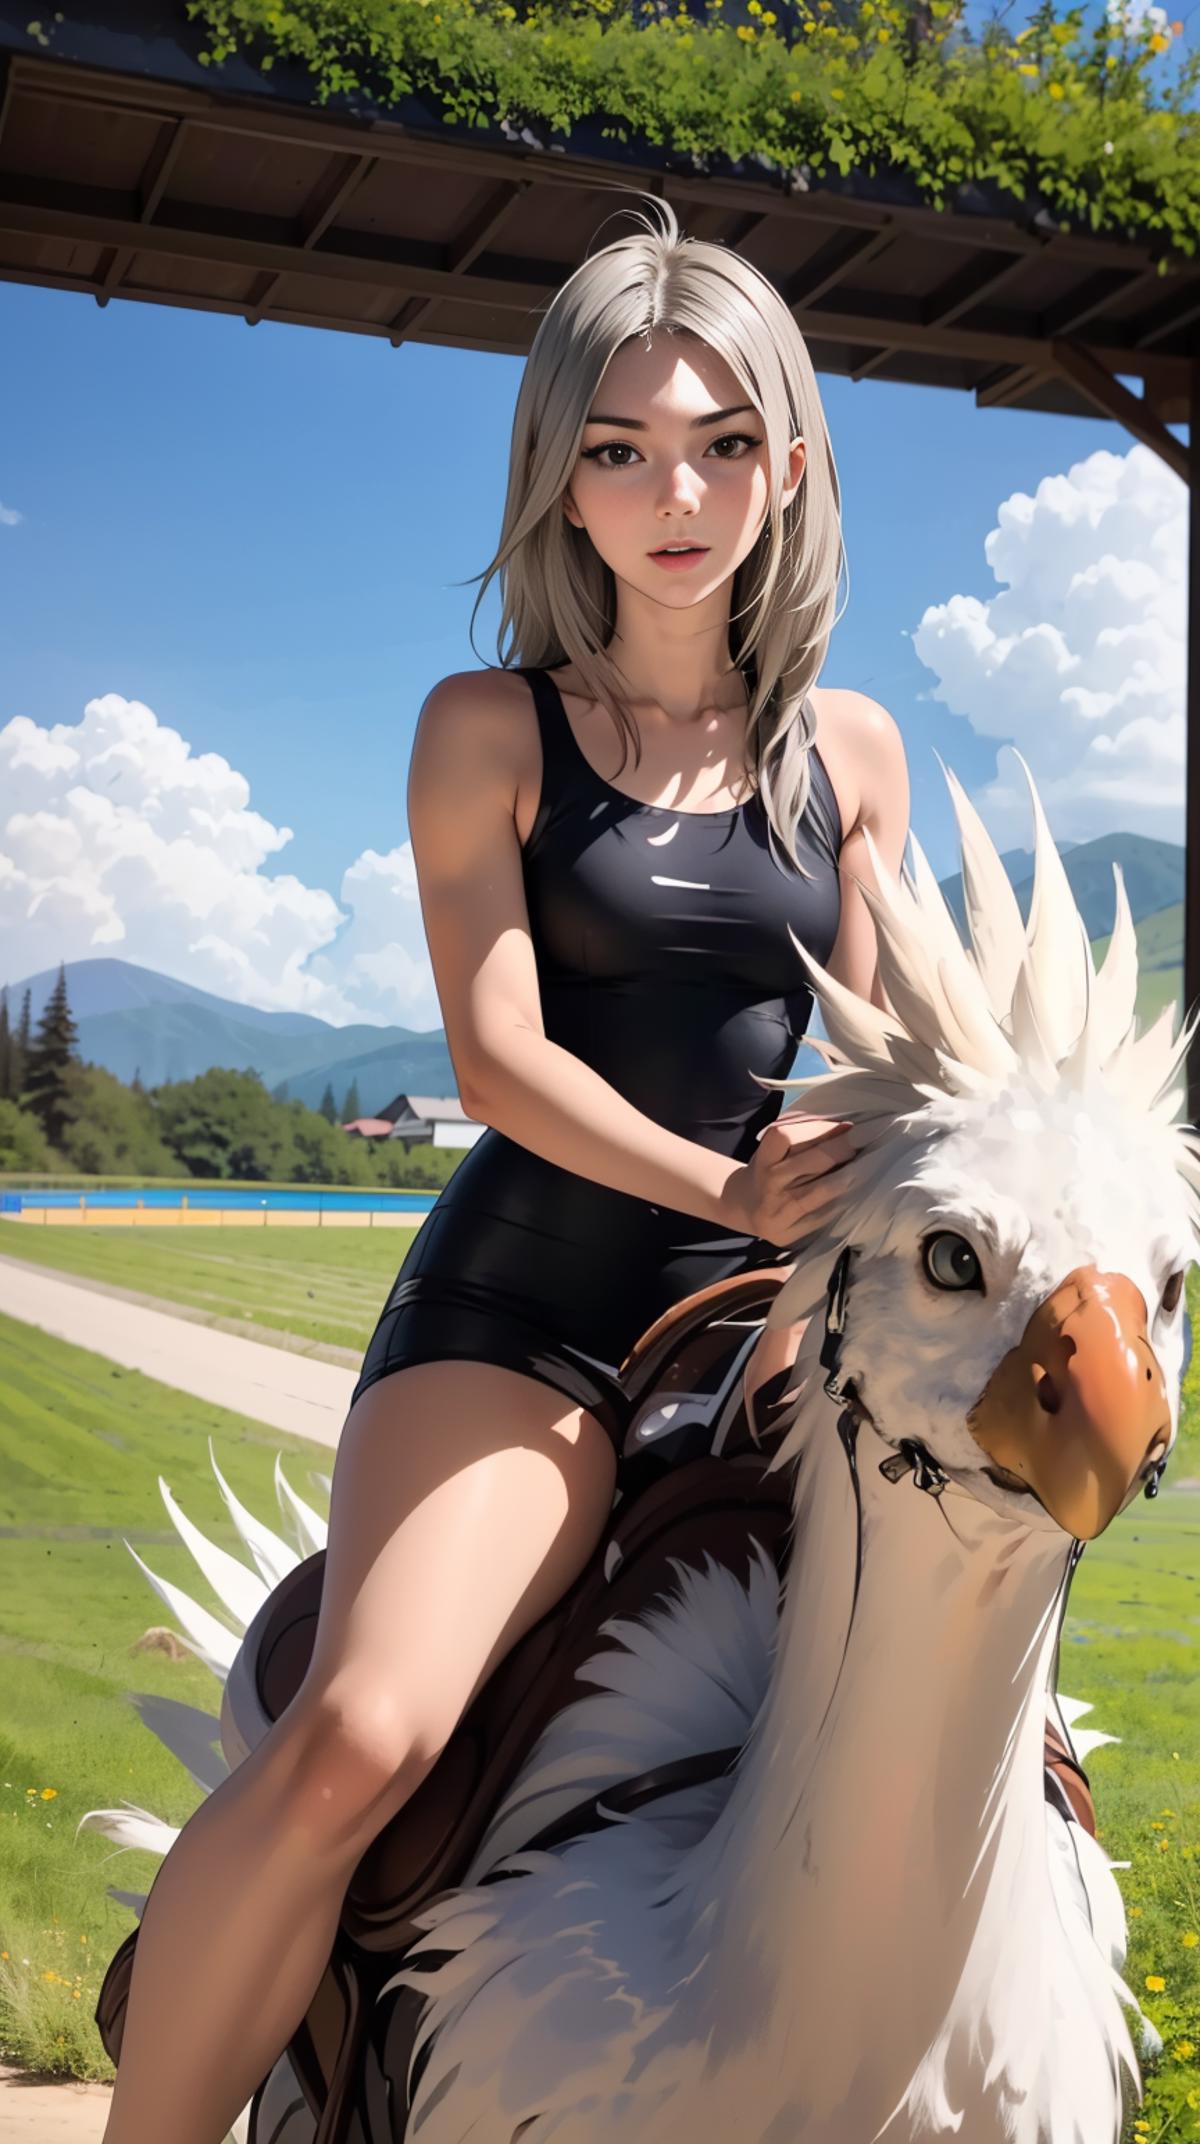 Chocobo Riding (Final Fantasy) LoRA image by mnemic